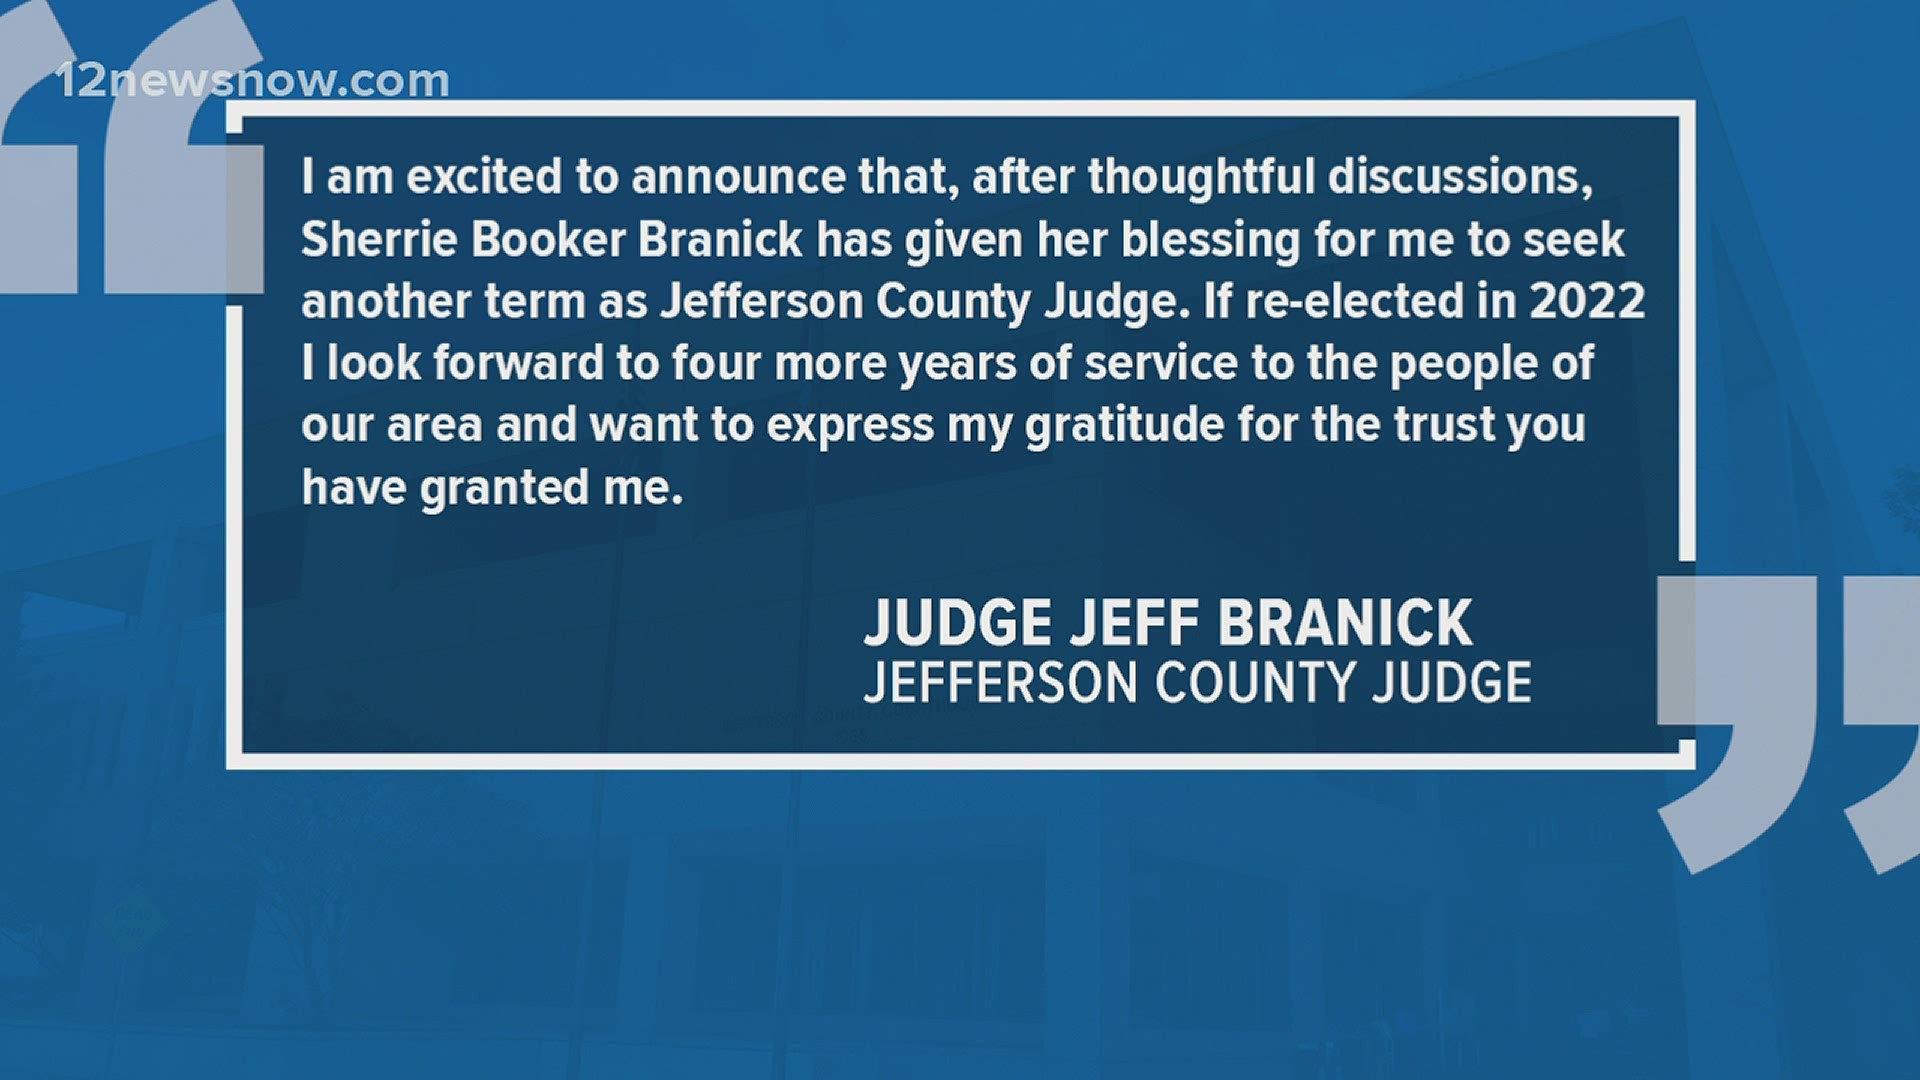 In a statement, the Southeast Texas judge said in part, "If re-elected in 2022, I look forward to four more years of service to the people."